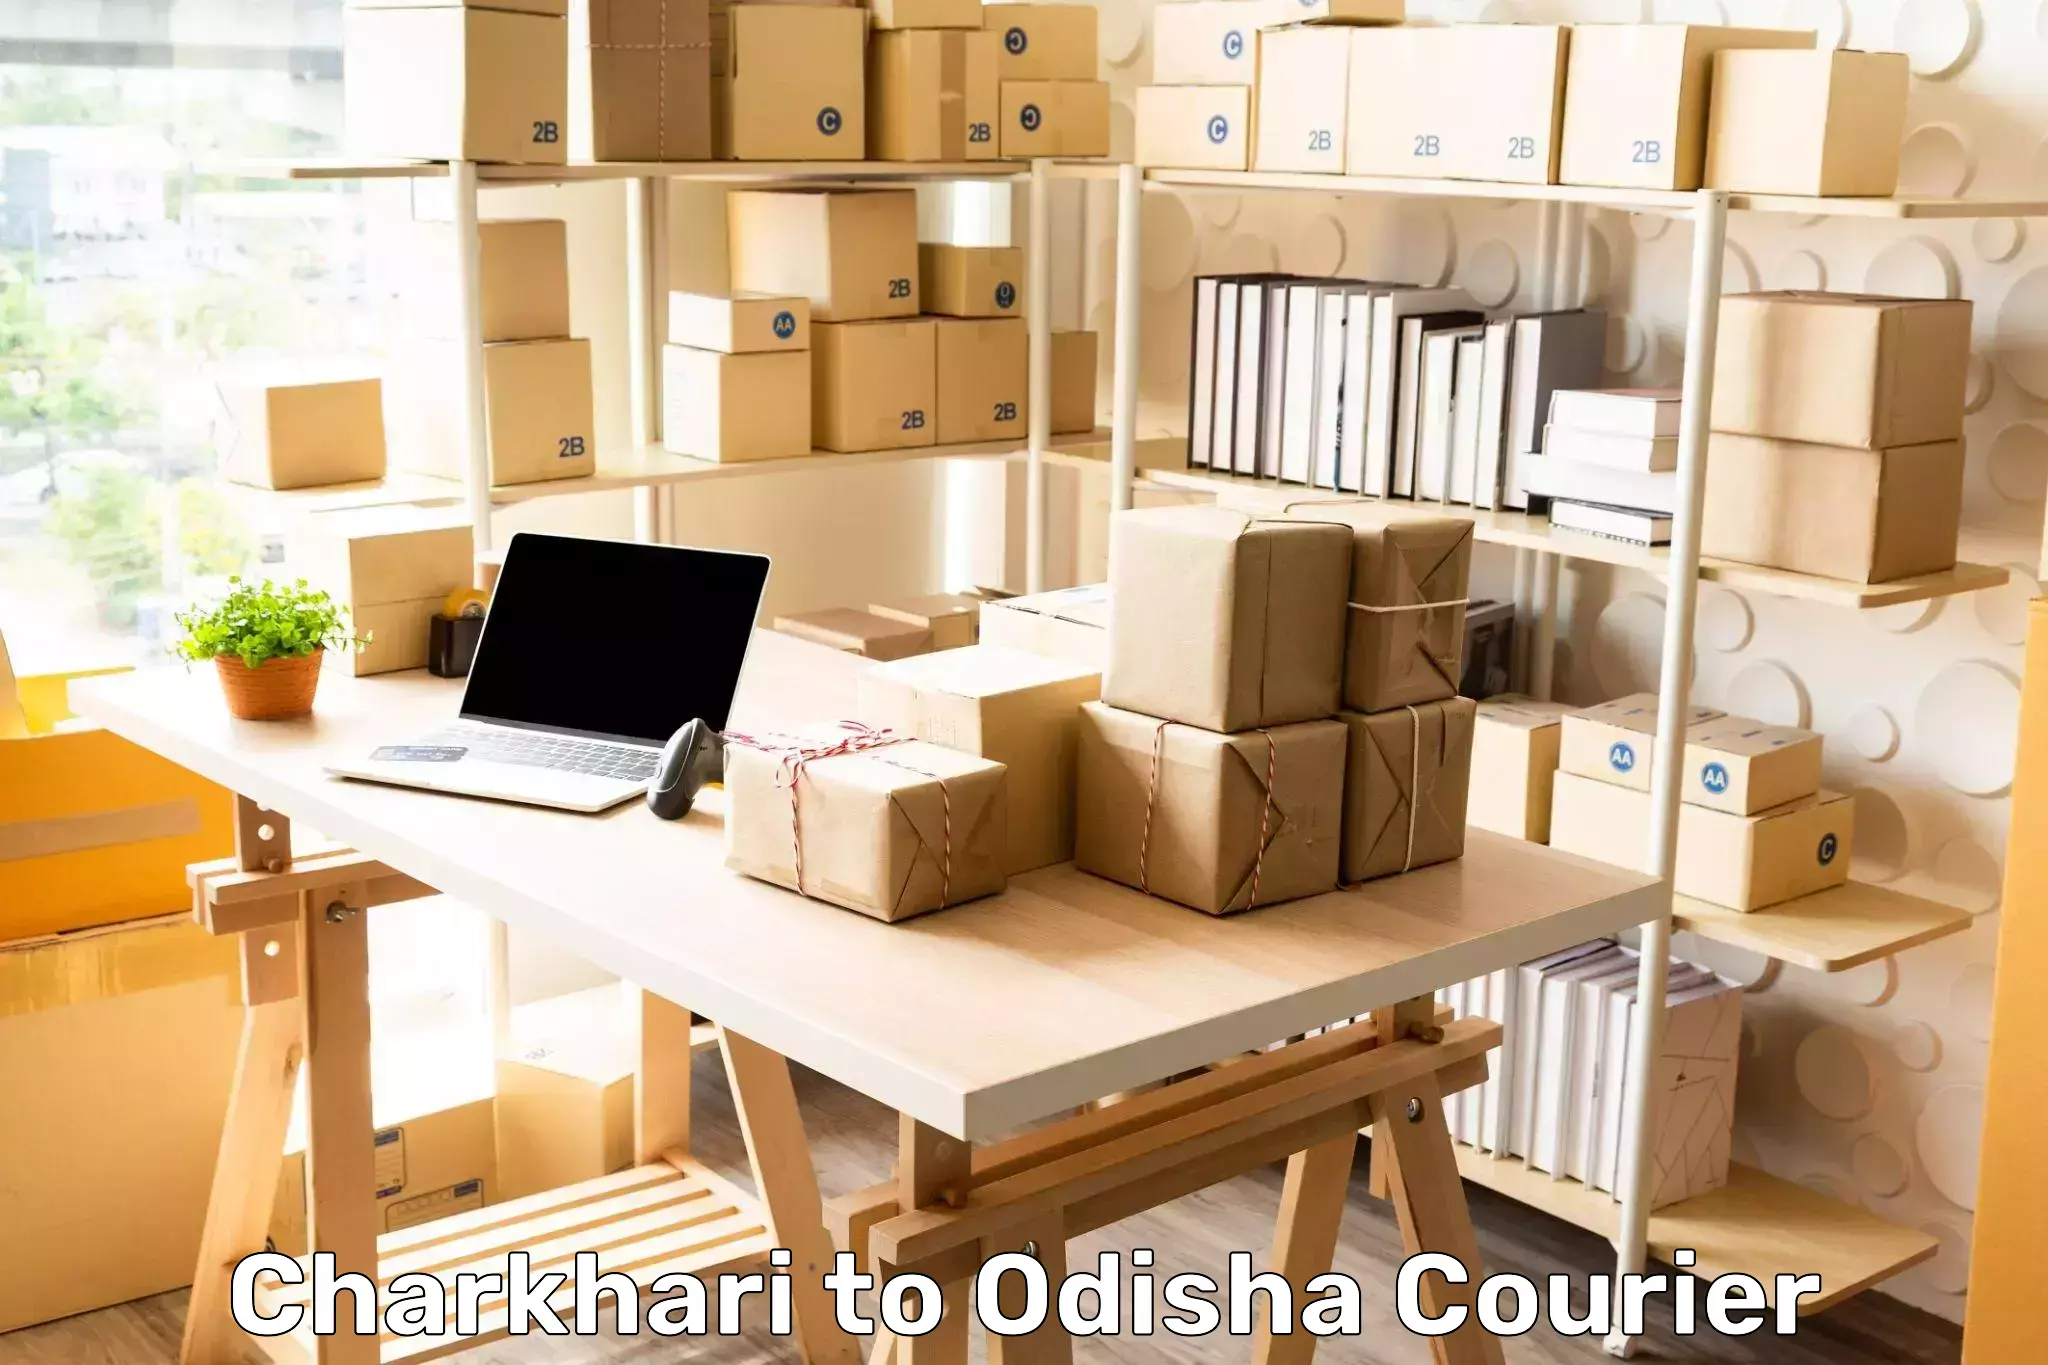 Discount courier rates Charkhari to Asika